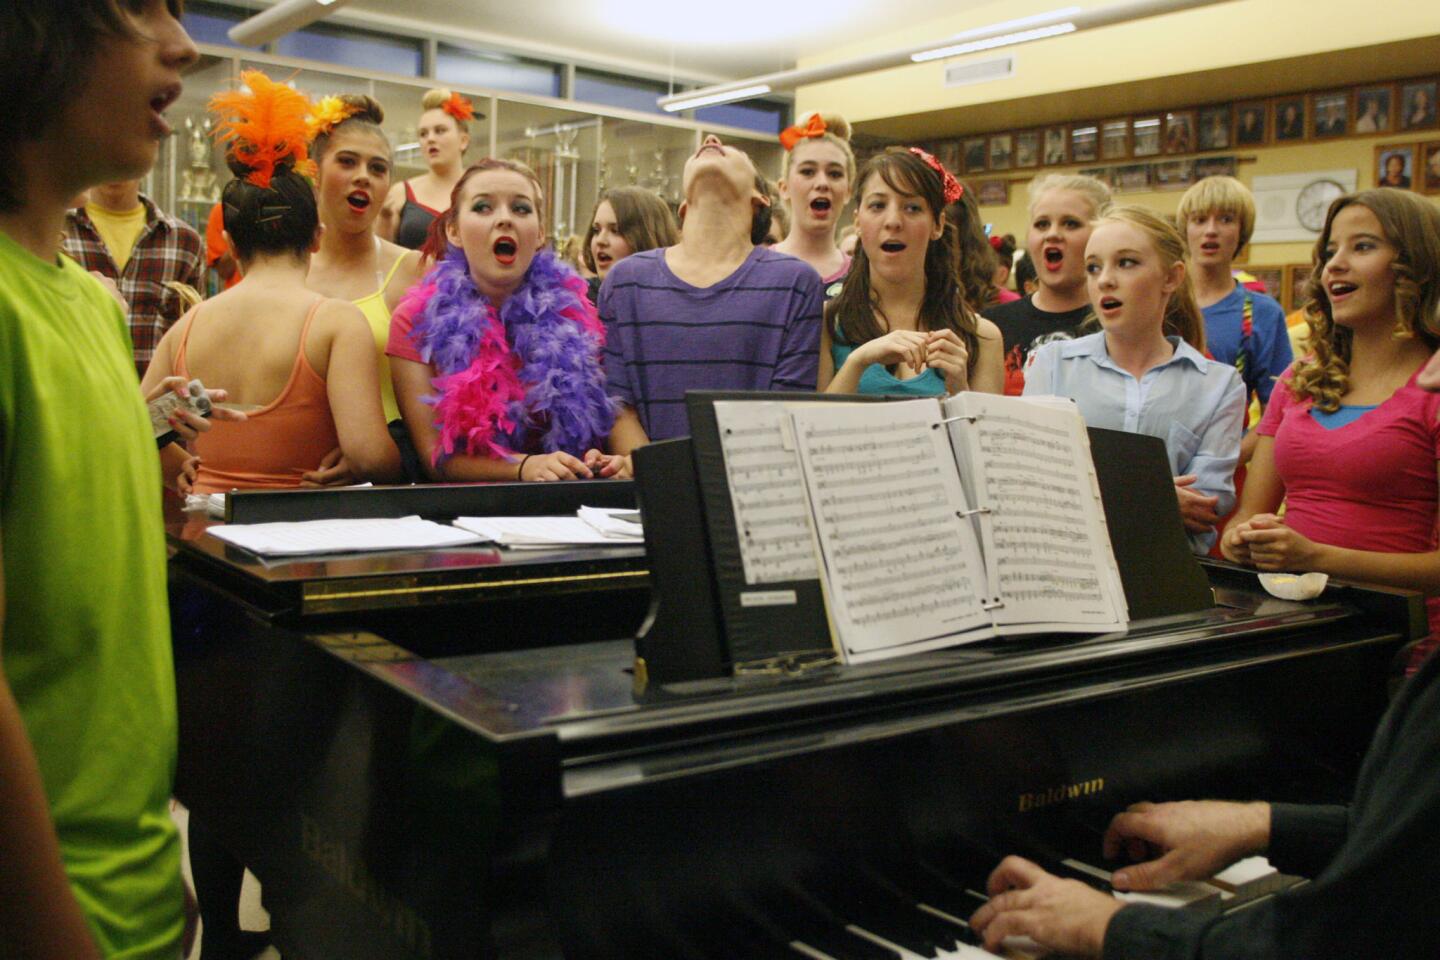 Cast members rehearse their songs before their John Burroughs High School Vocal Music Assn. performance, "Burroughs on Broadway," which took place at John Burroughs High School in Burbank on Friday, October 12, 2012.